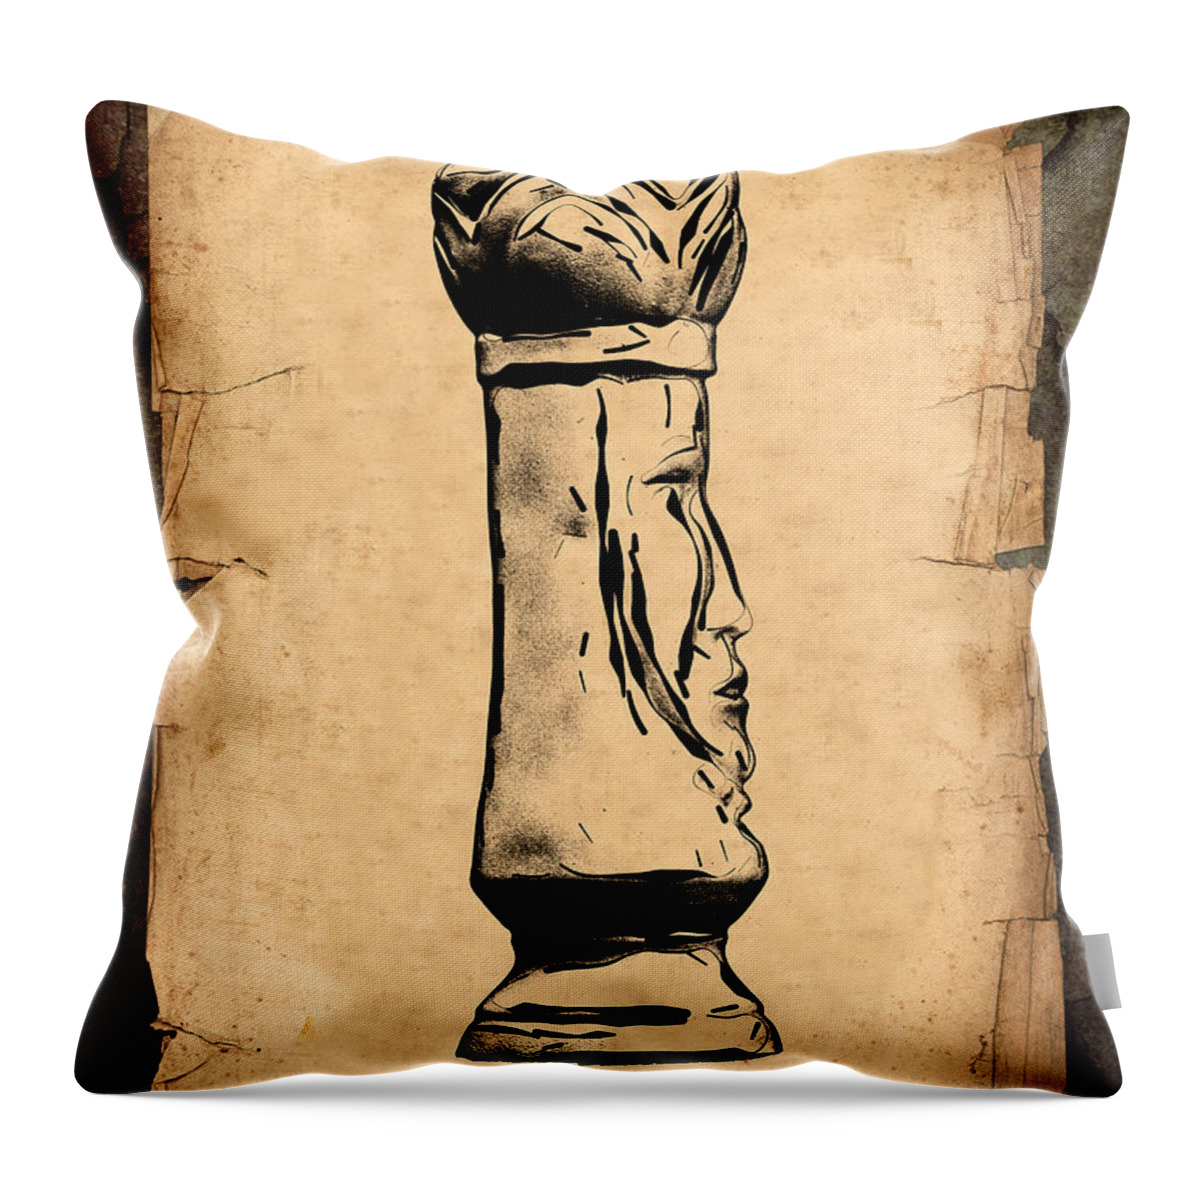 King Throw Pillow featuring the photograph Chess King by Tom Mc Nemar